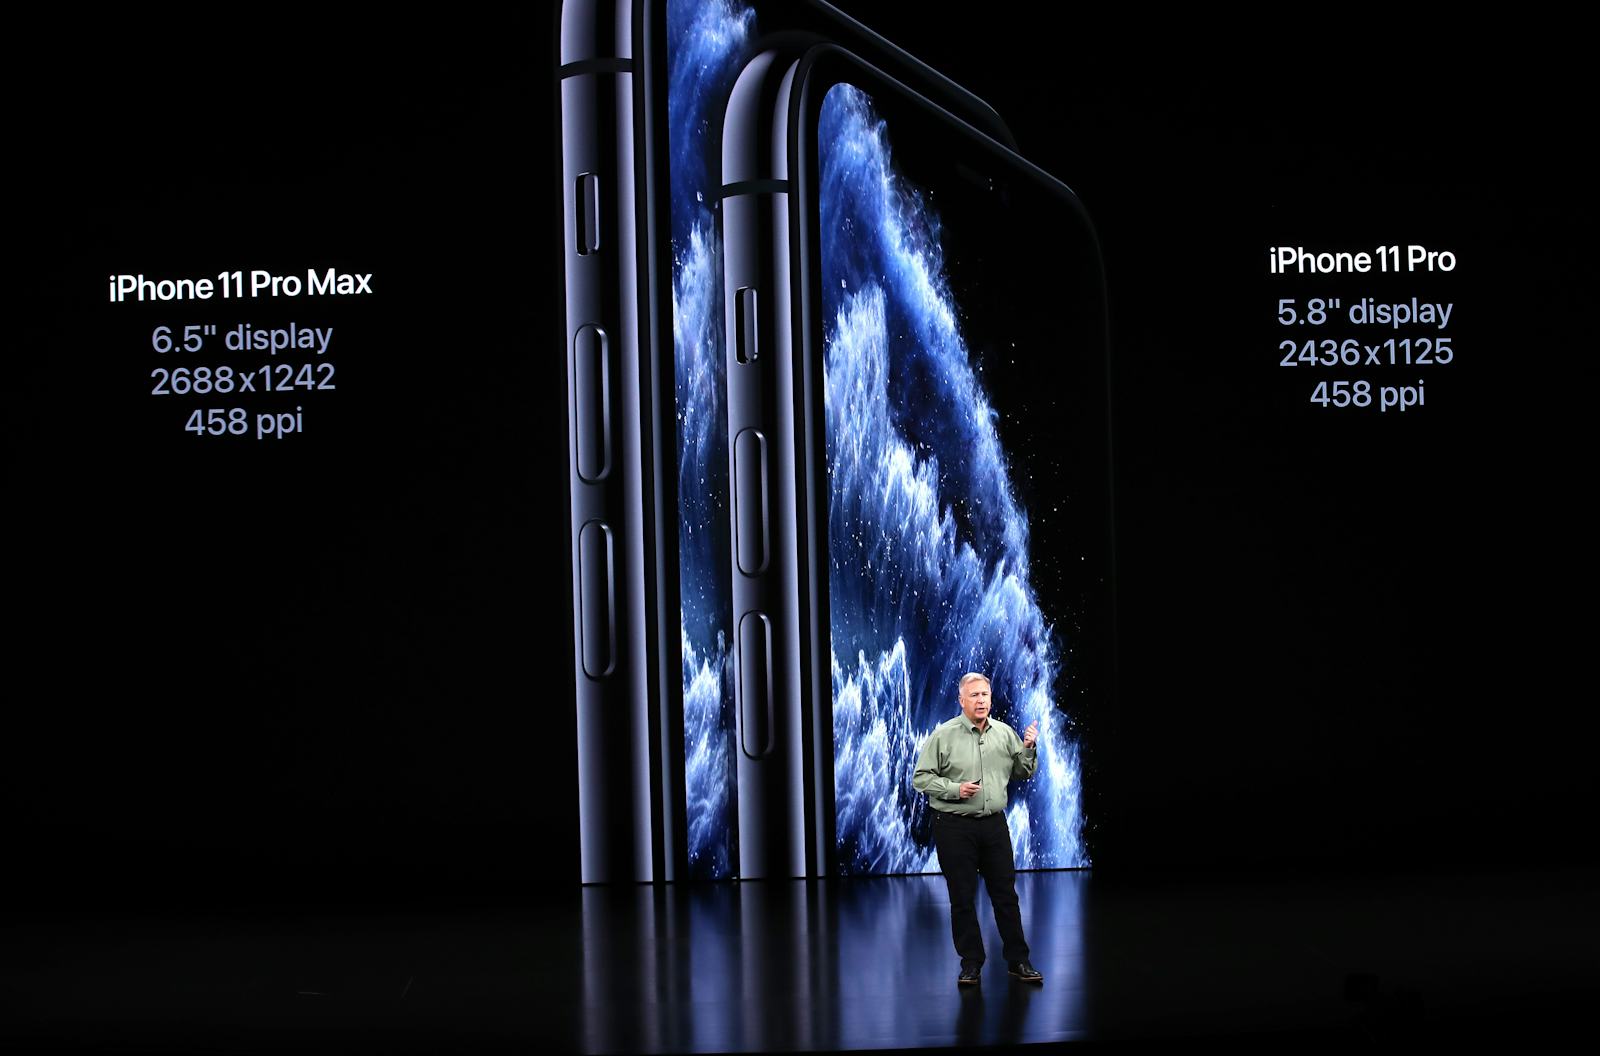 Which iPhone Has The Biggest Screen Size? The iPhone 11 Pro Max